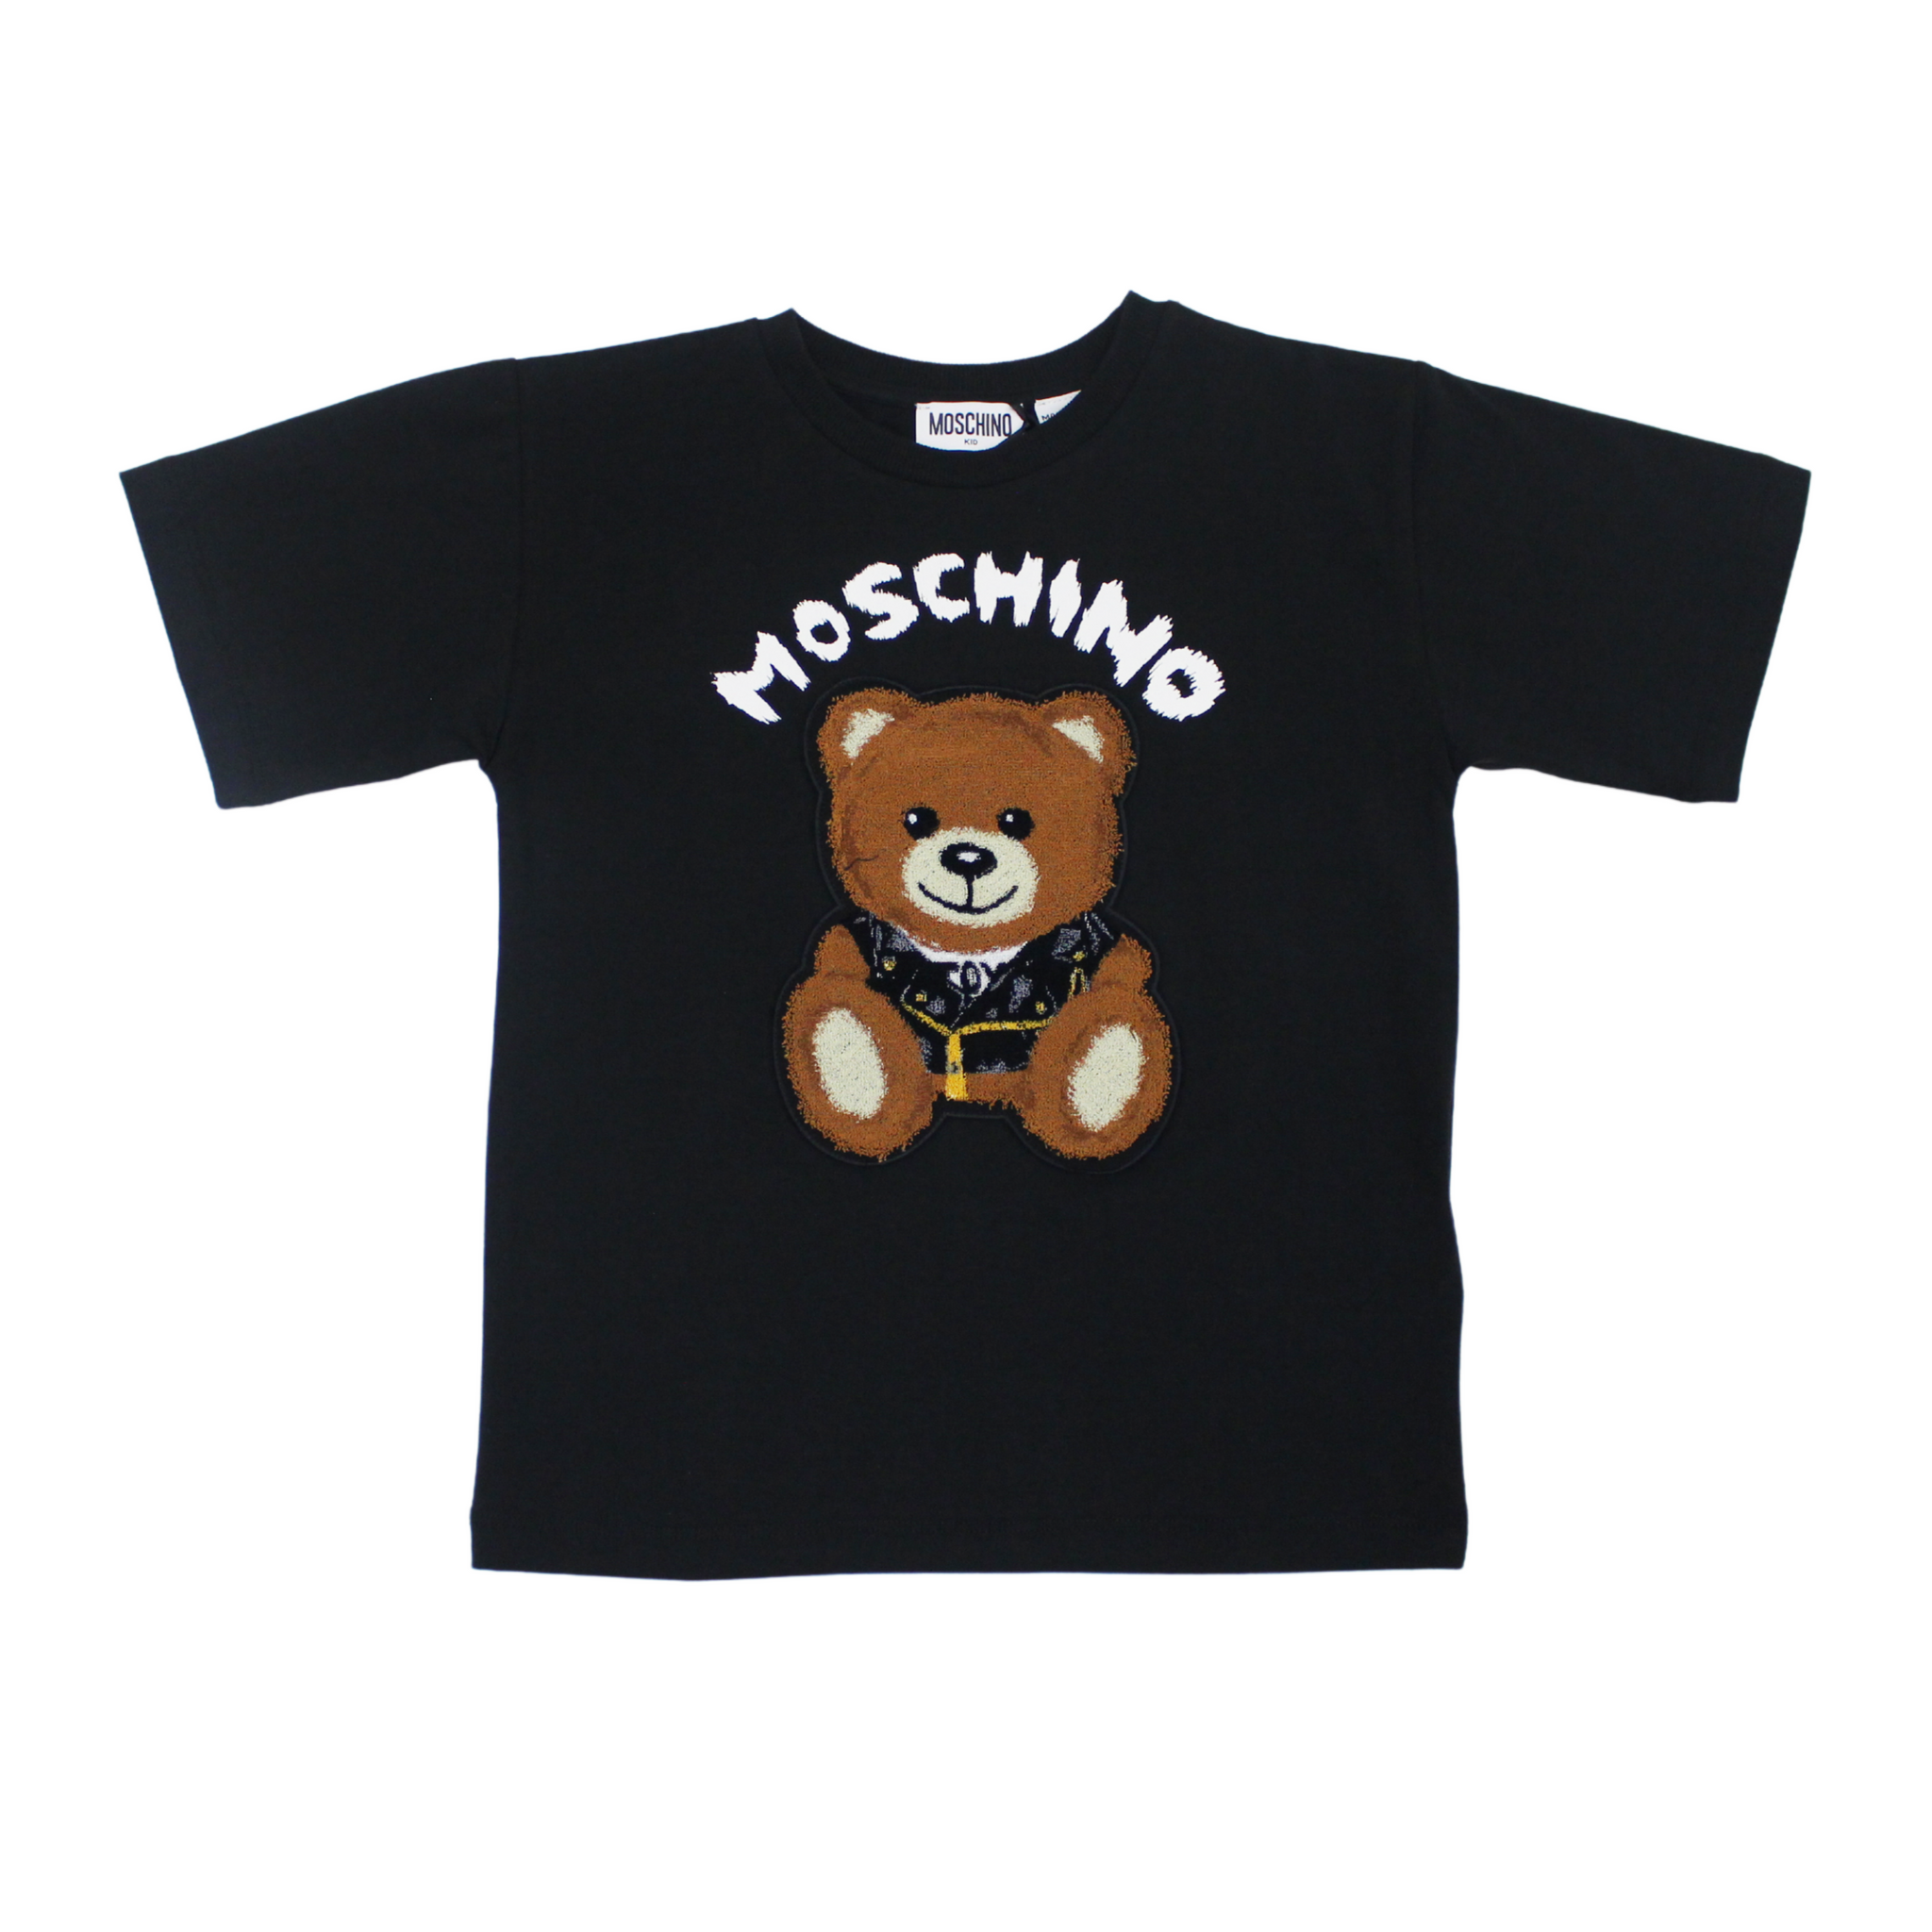 MAXI SS T SHIRT WITH LARGE BEAR GRAPHIC - BLACK